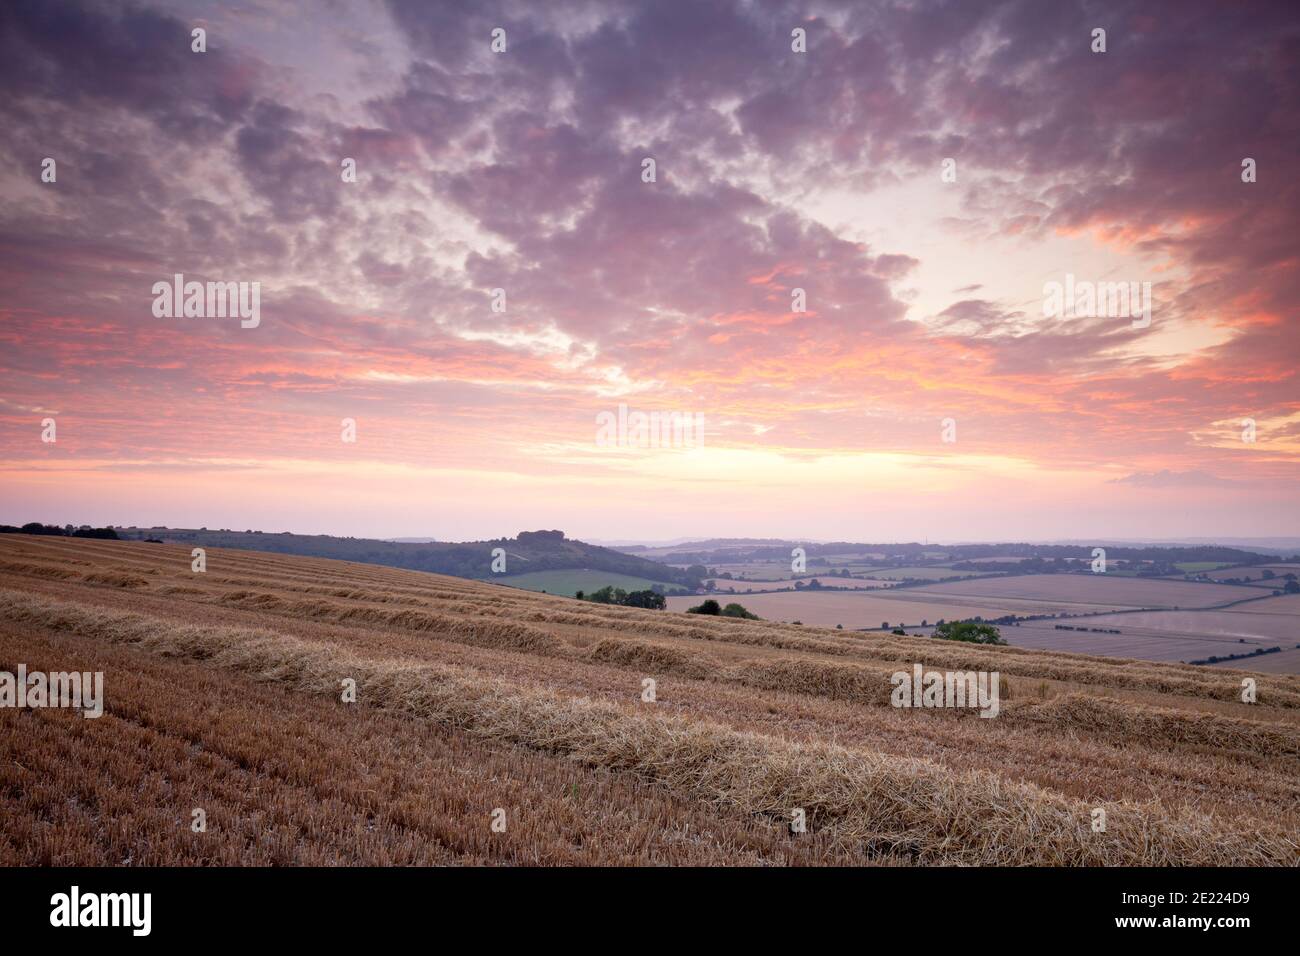 Sunset over a recently harvested field near Fovant in the Nadder Valley, Wiltshire. Stock Photo